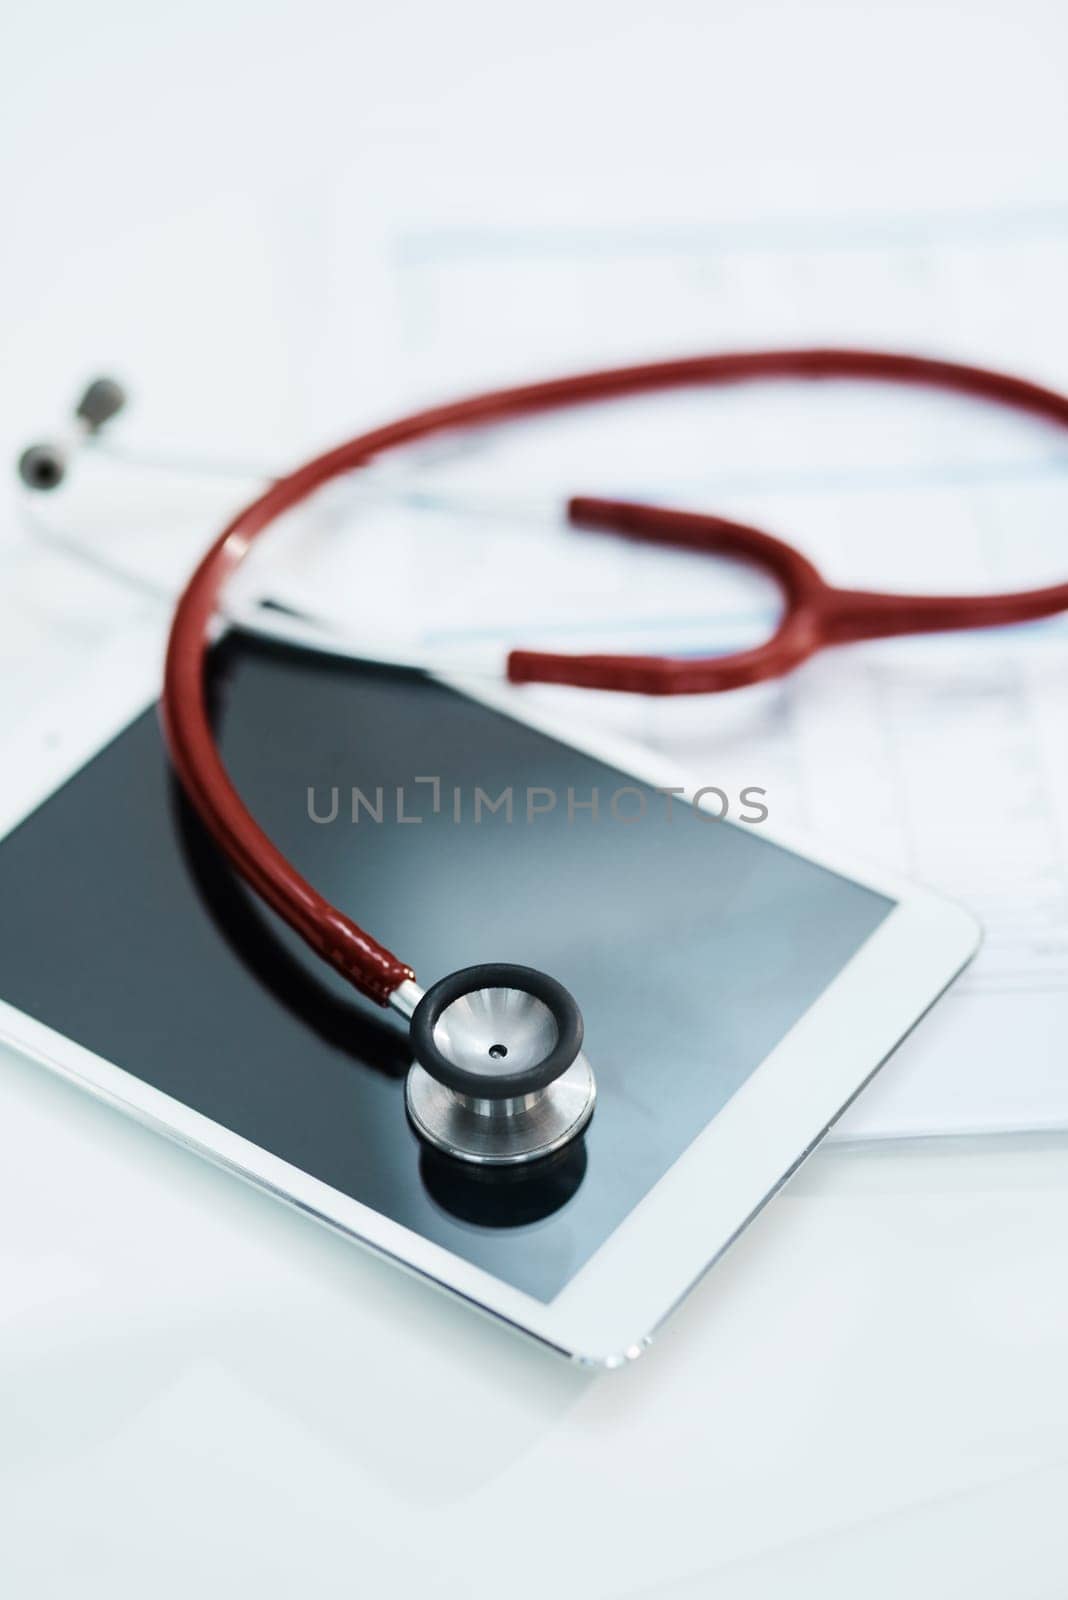 Hospital, telehealth and tablet with stethoscope on desk for medical website, healthcare and research. Documents, cardiology and digital tech, equipment and clipboard for online consulting service.